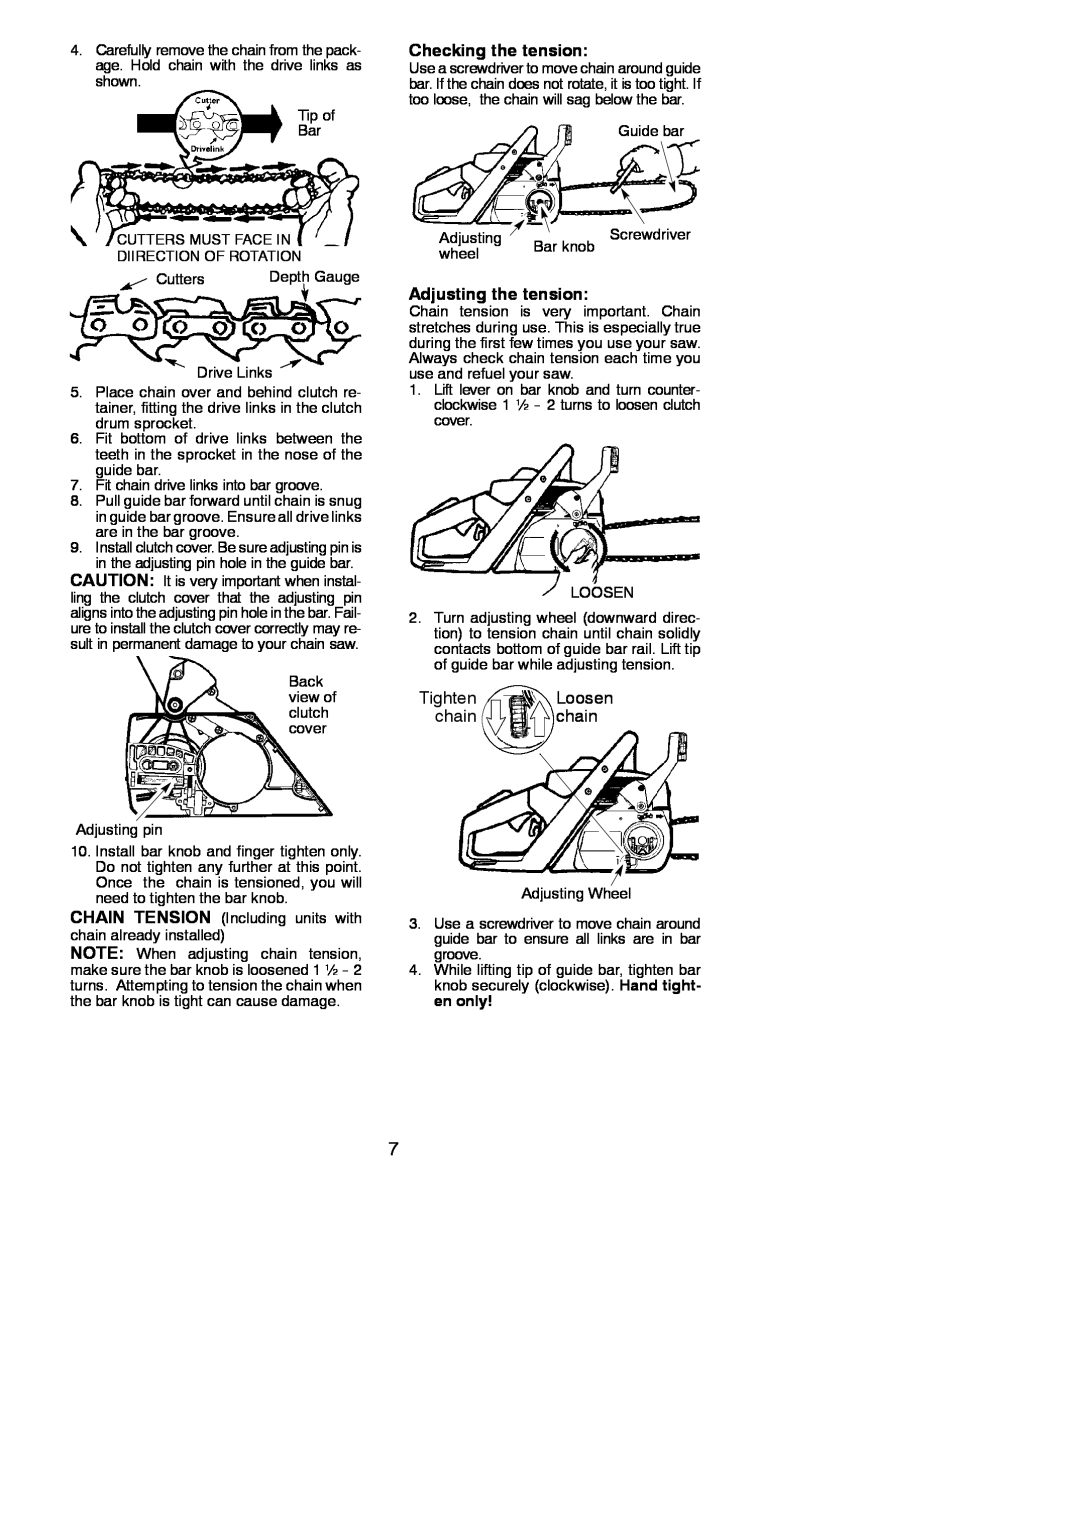 Poulan PP4620AVX instruction manual Checking the tension, Adjusting the tension, Tighten Loosen chain chain 